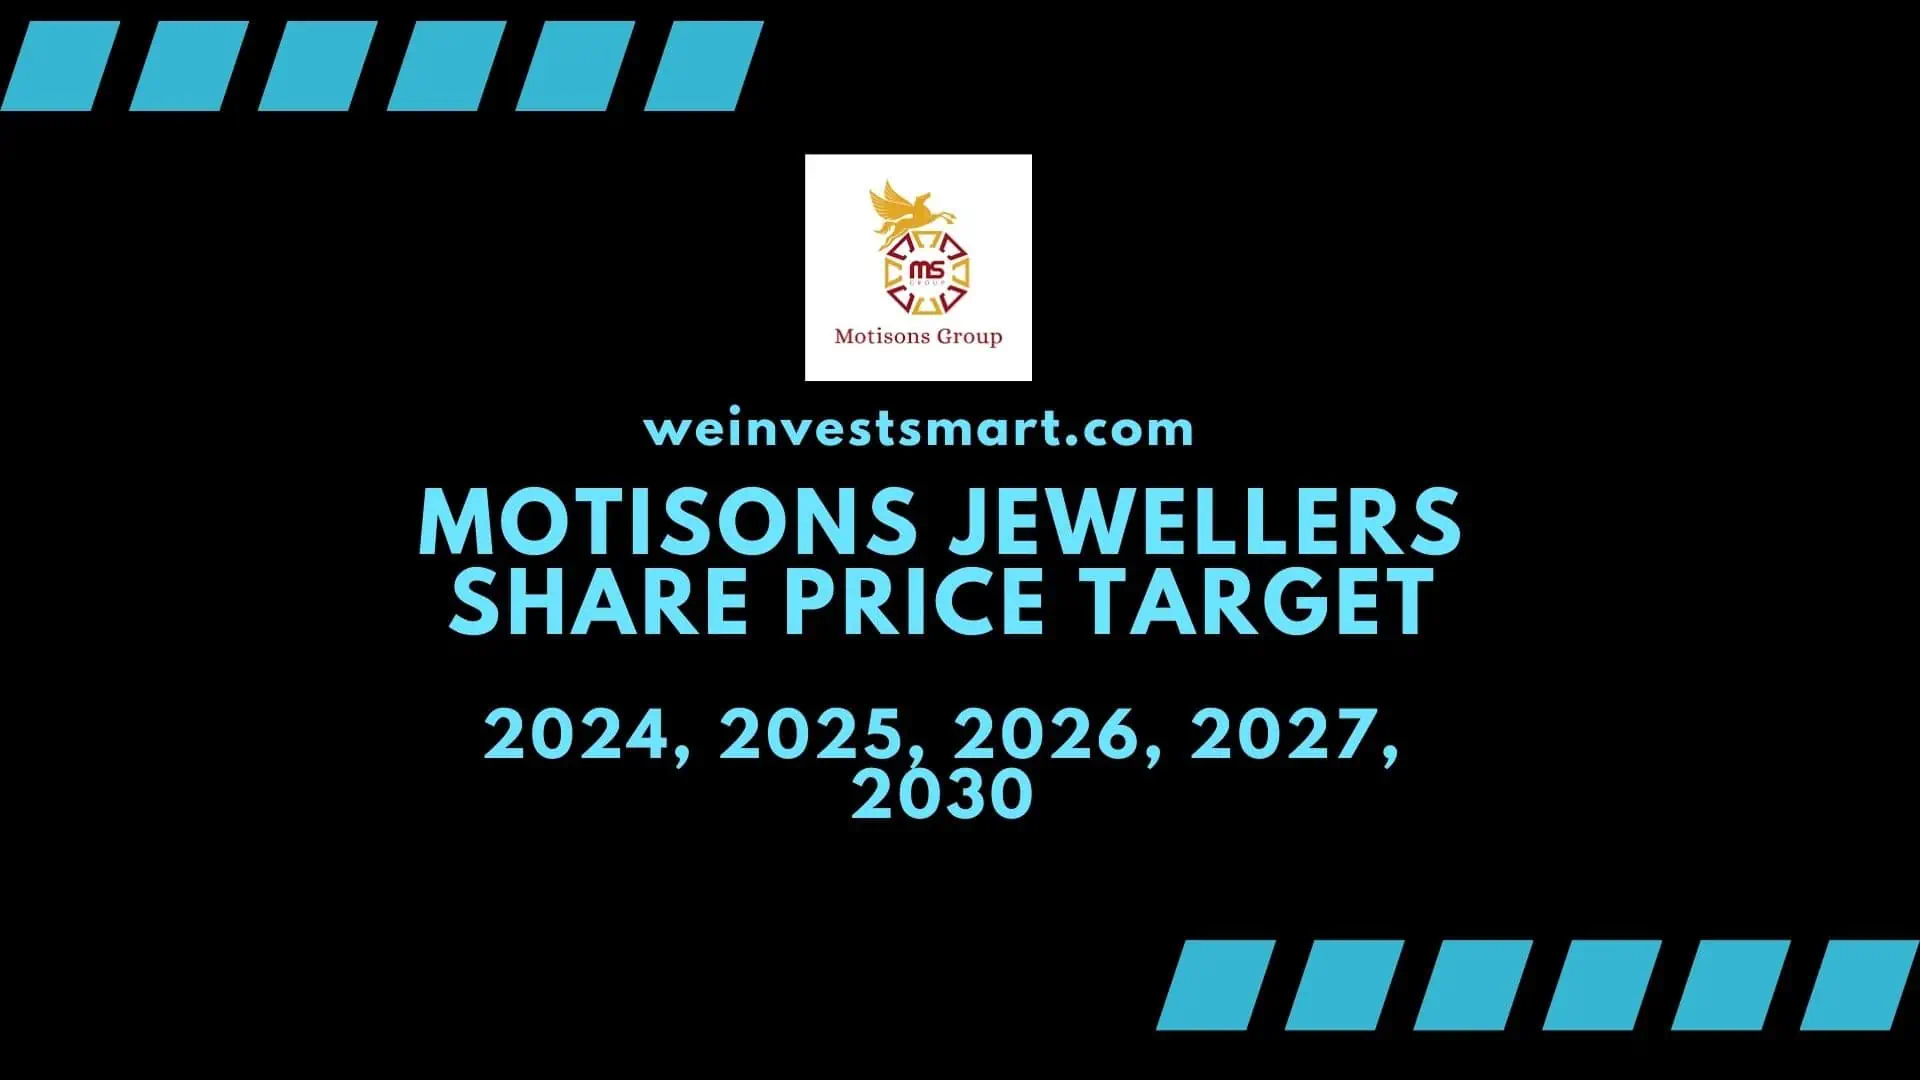 Motisons Jewellers share price target 2024, 2025, 2026, 2027, 2030 prediction